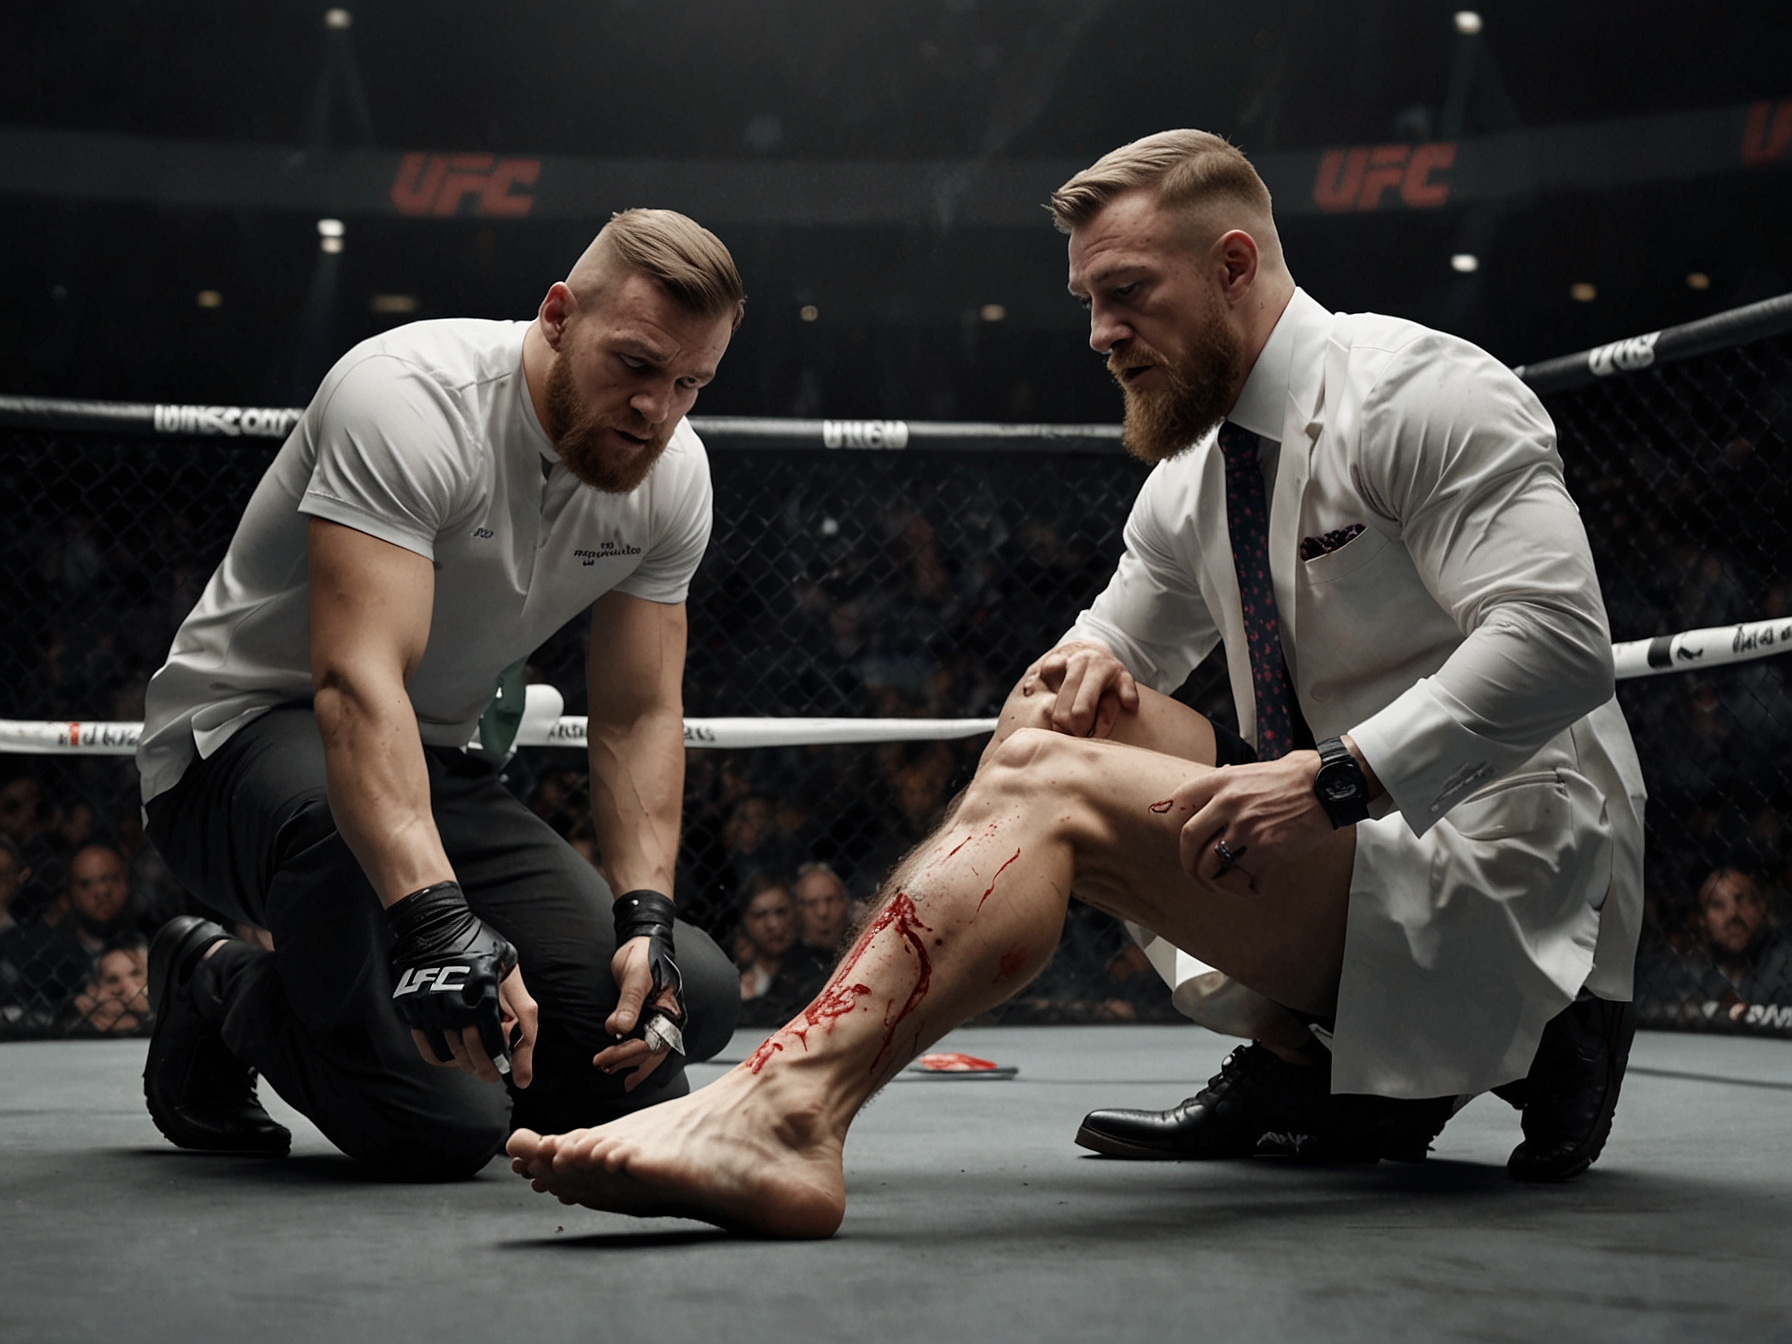 Conor McGregor's leg injury being assessed by medical professionals during a UFC event.